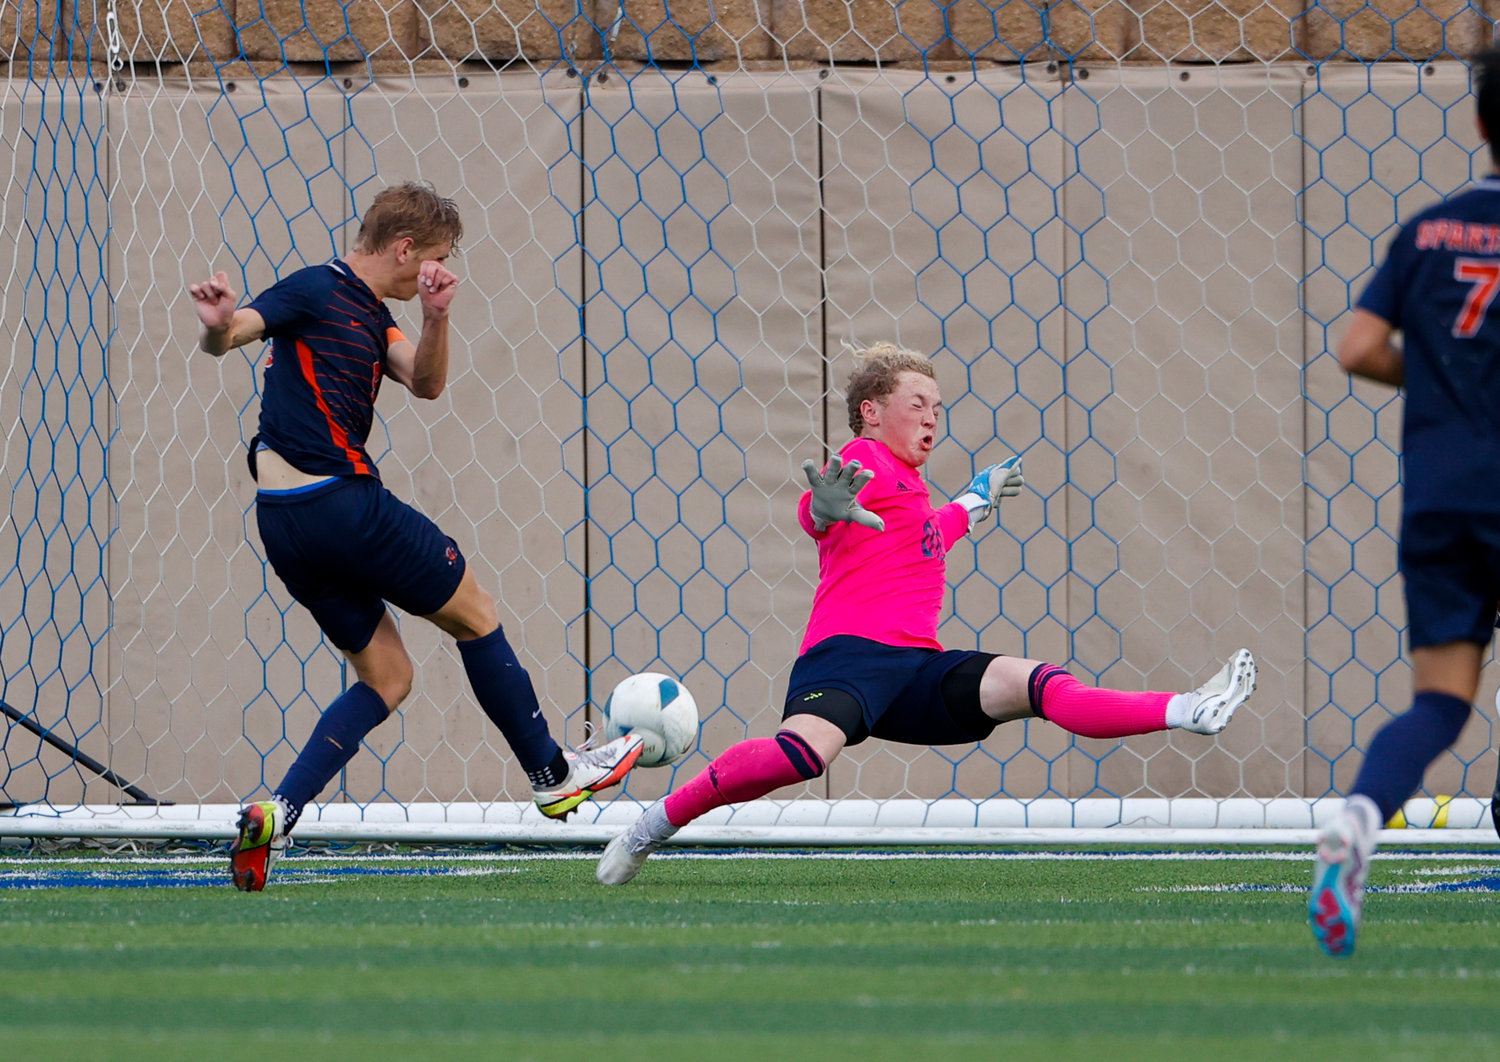 Seven Lakes forward Hunter Merritt (9) gets a ball past Sachse goalkeeper Josh Weston (00) in overtime of the Class 6A boys state semifinal soccer game between Seven Lakes and Sachse on April 14, 2023 in Georgetown.